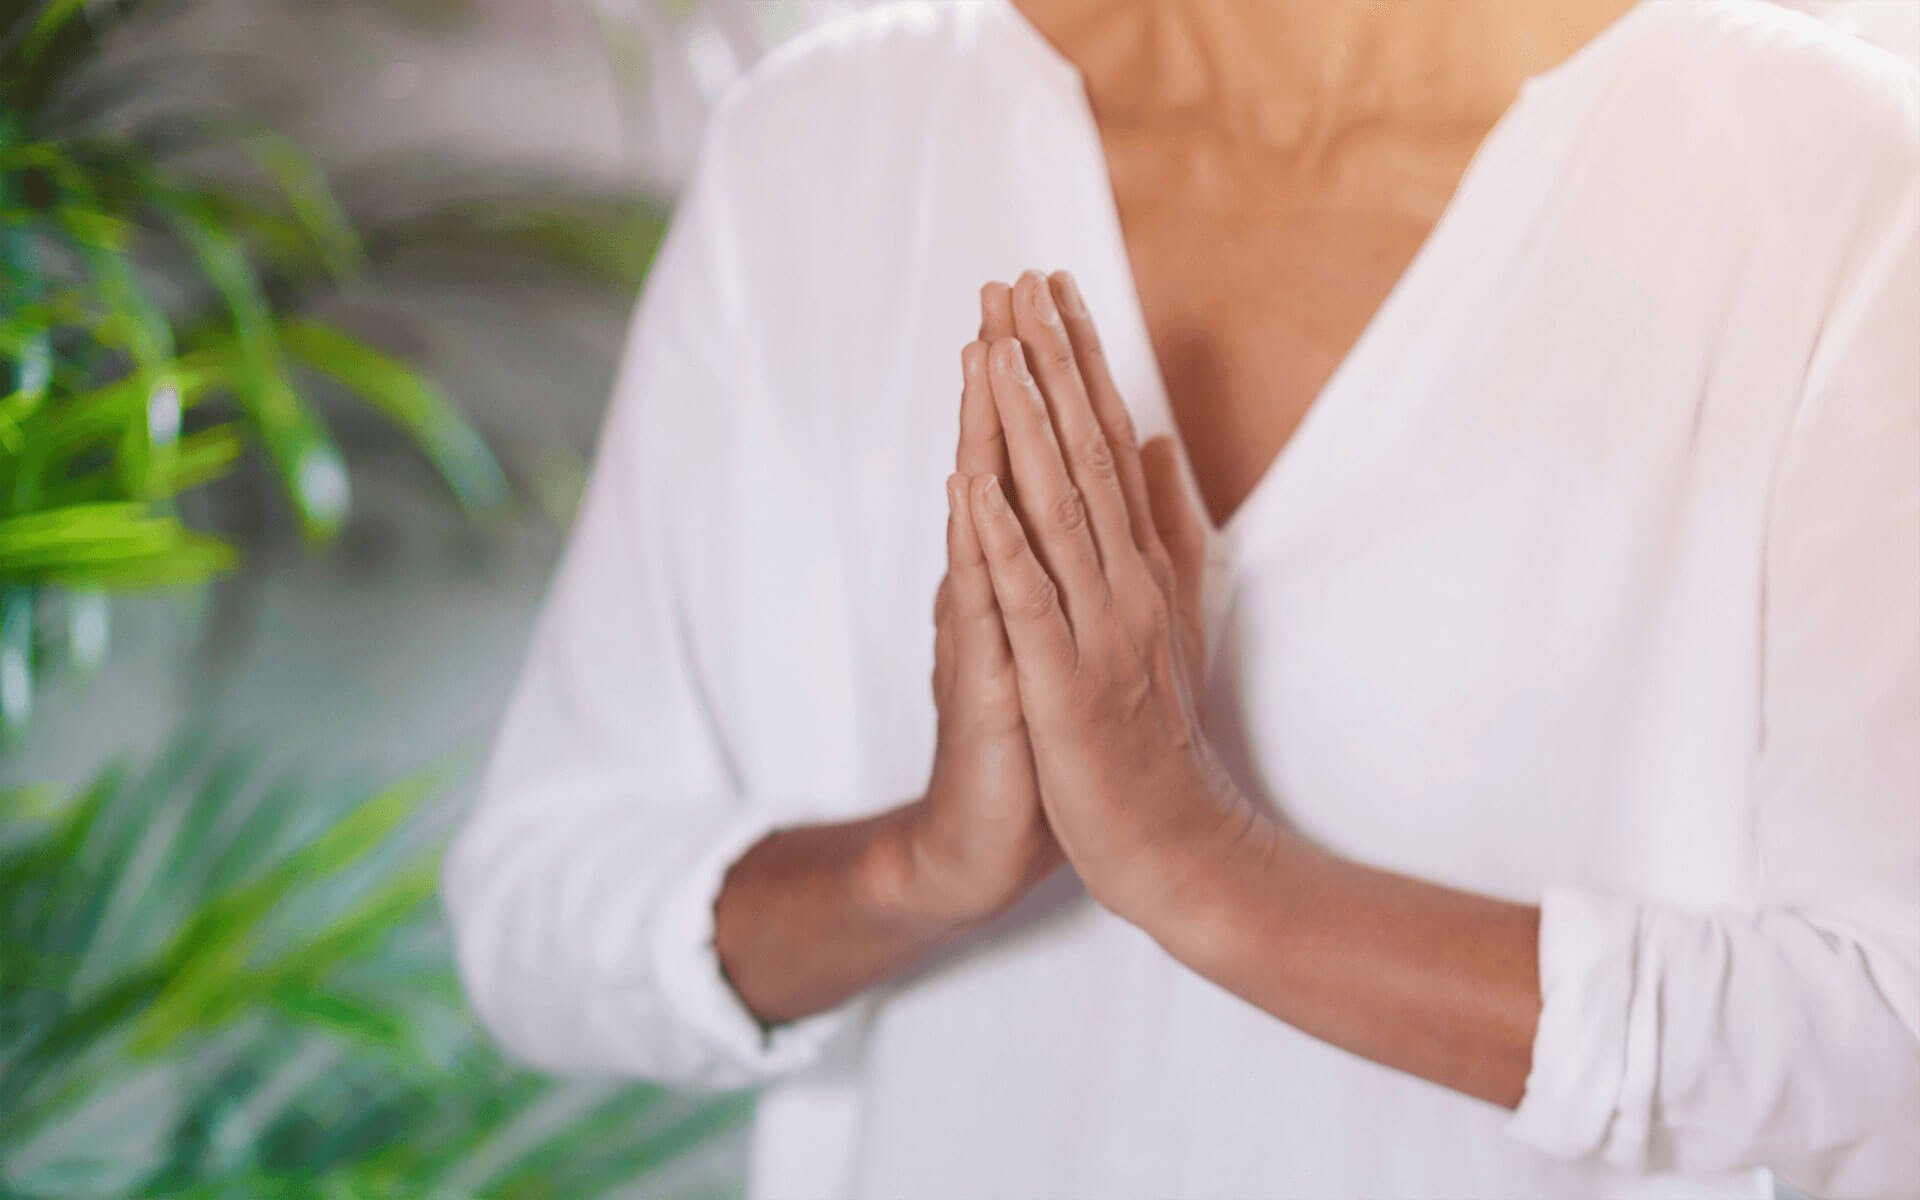 Reiki master's hands in a prayerful position in front of the heart